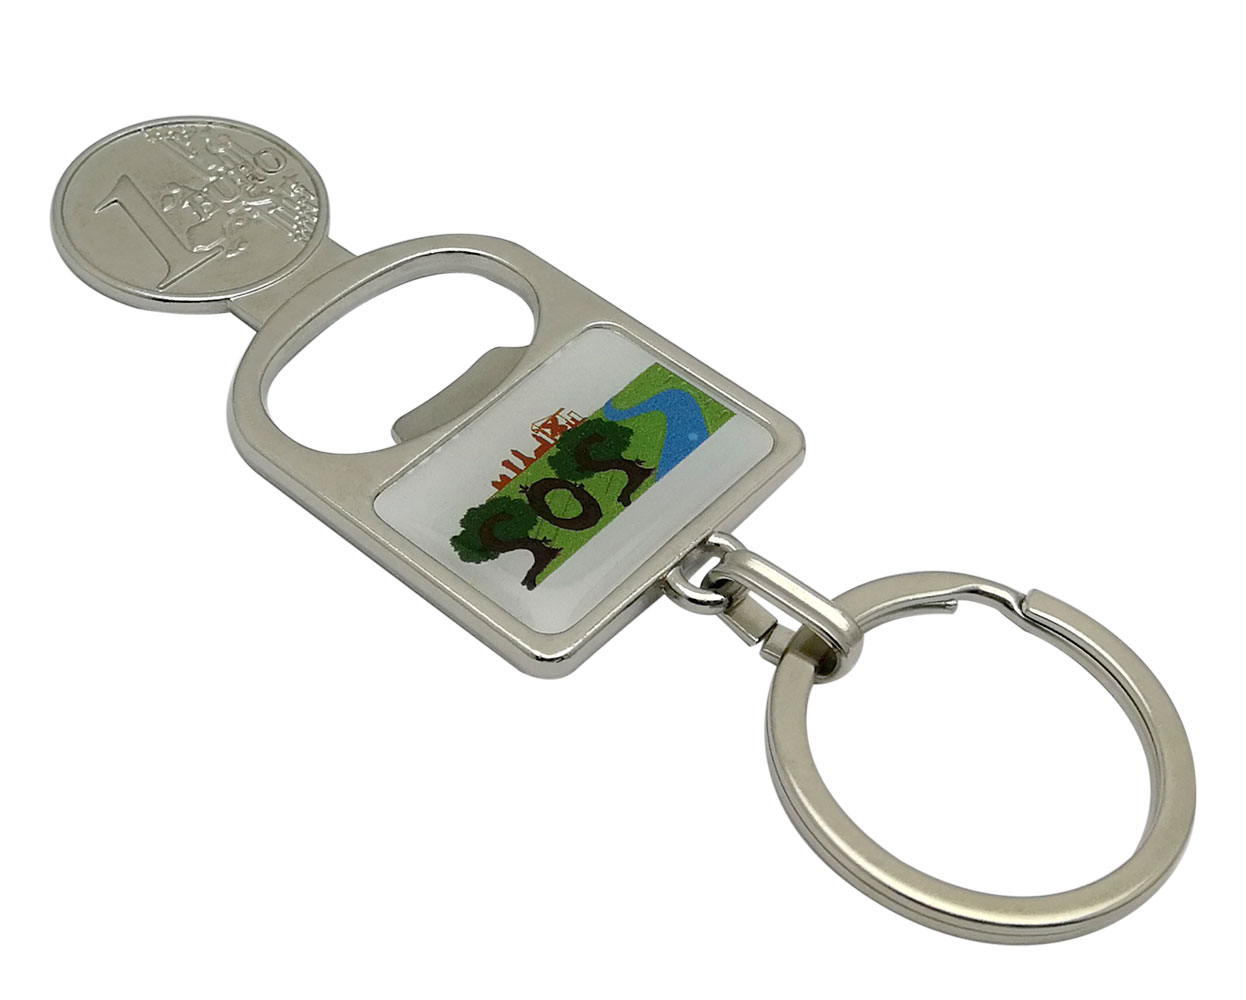 AC-108 Keychain Opener and coin